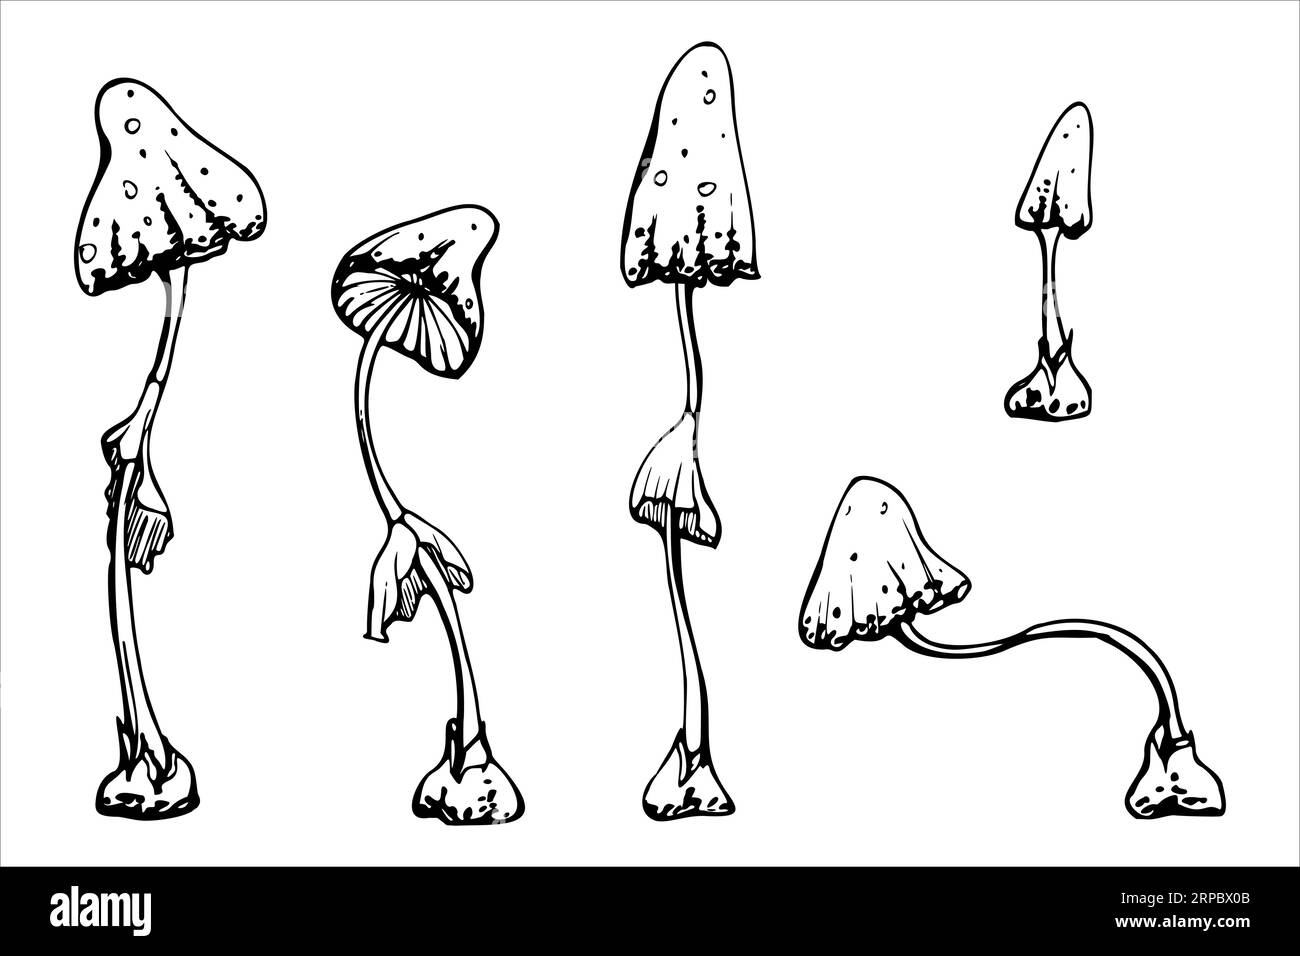 Hand drawn ink vector poisonous mushrooms toadstoools. Sketch illustration art for witchcraft, medicine, chemistry, alchemy. Isolated object, outline Stock Vector